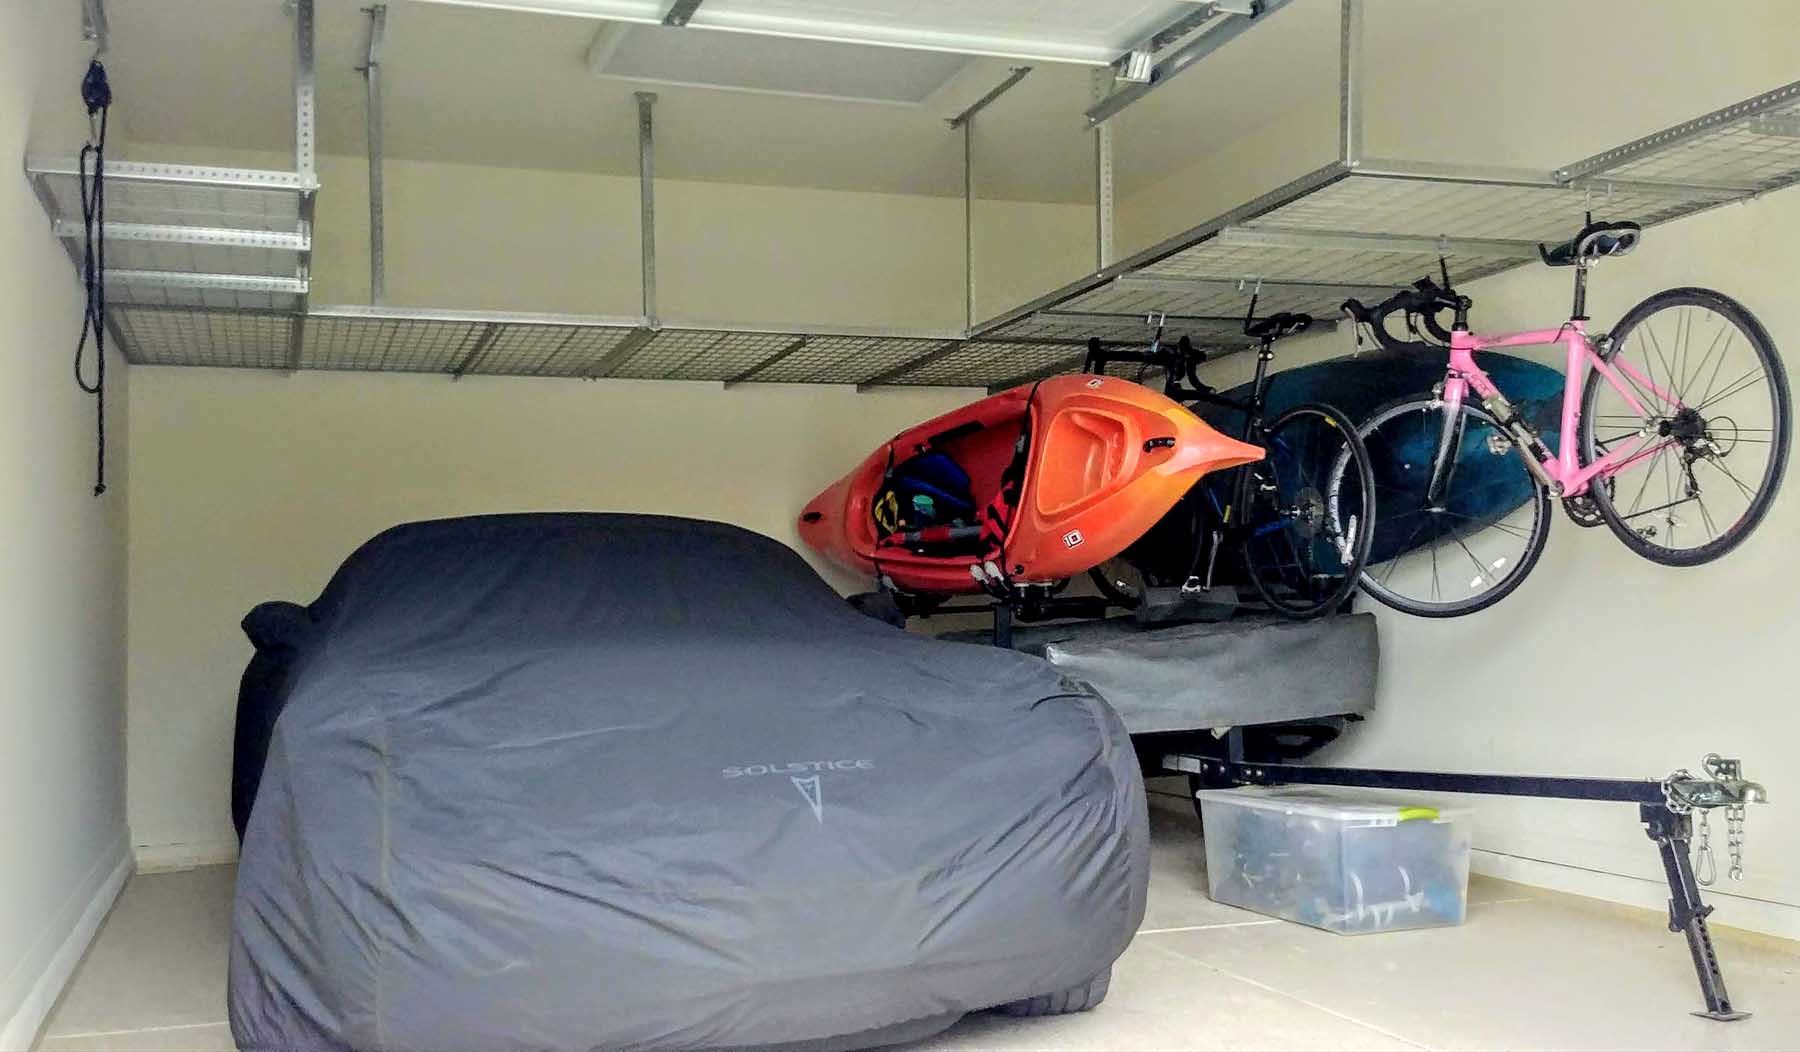 Park your car in the garage again after we install our overhead garage storage racks